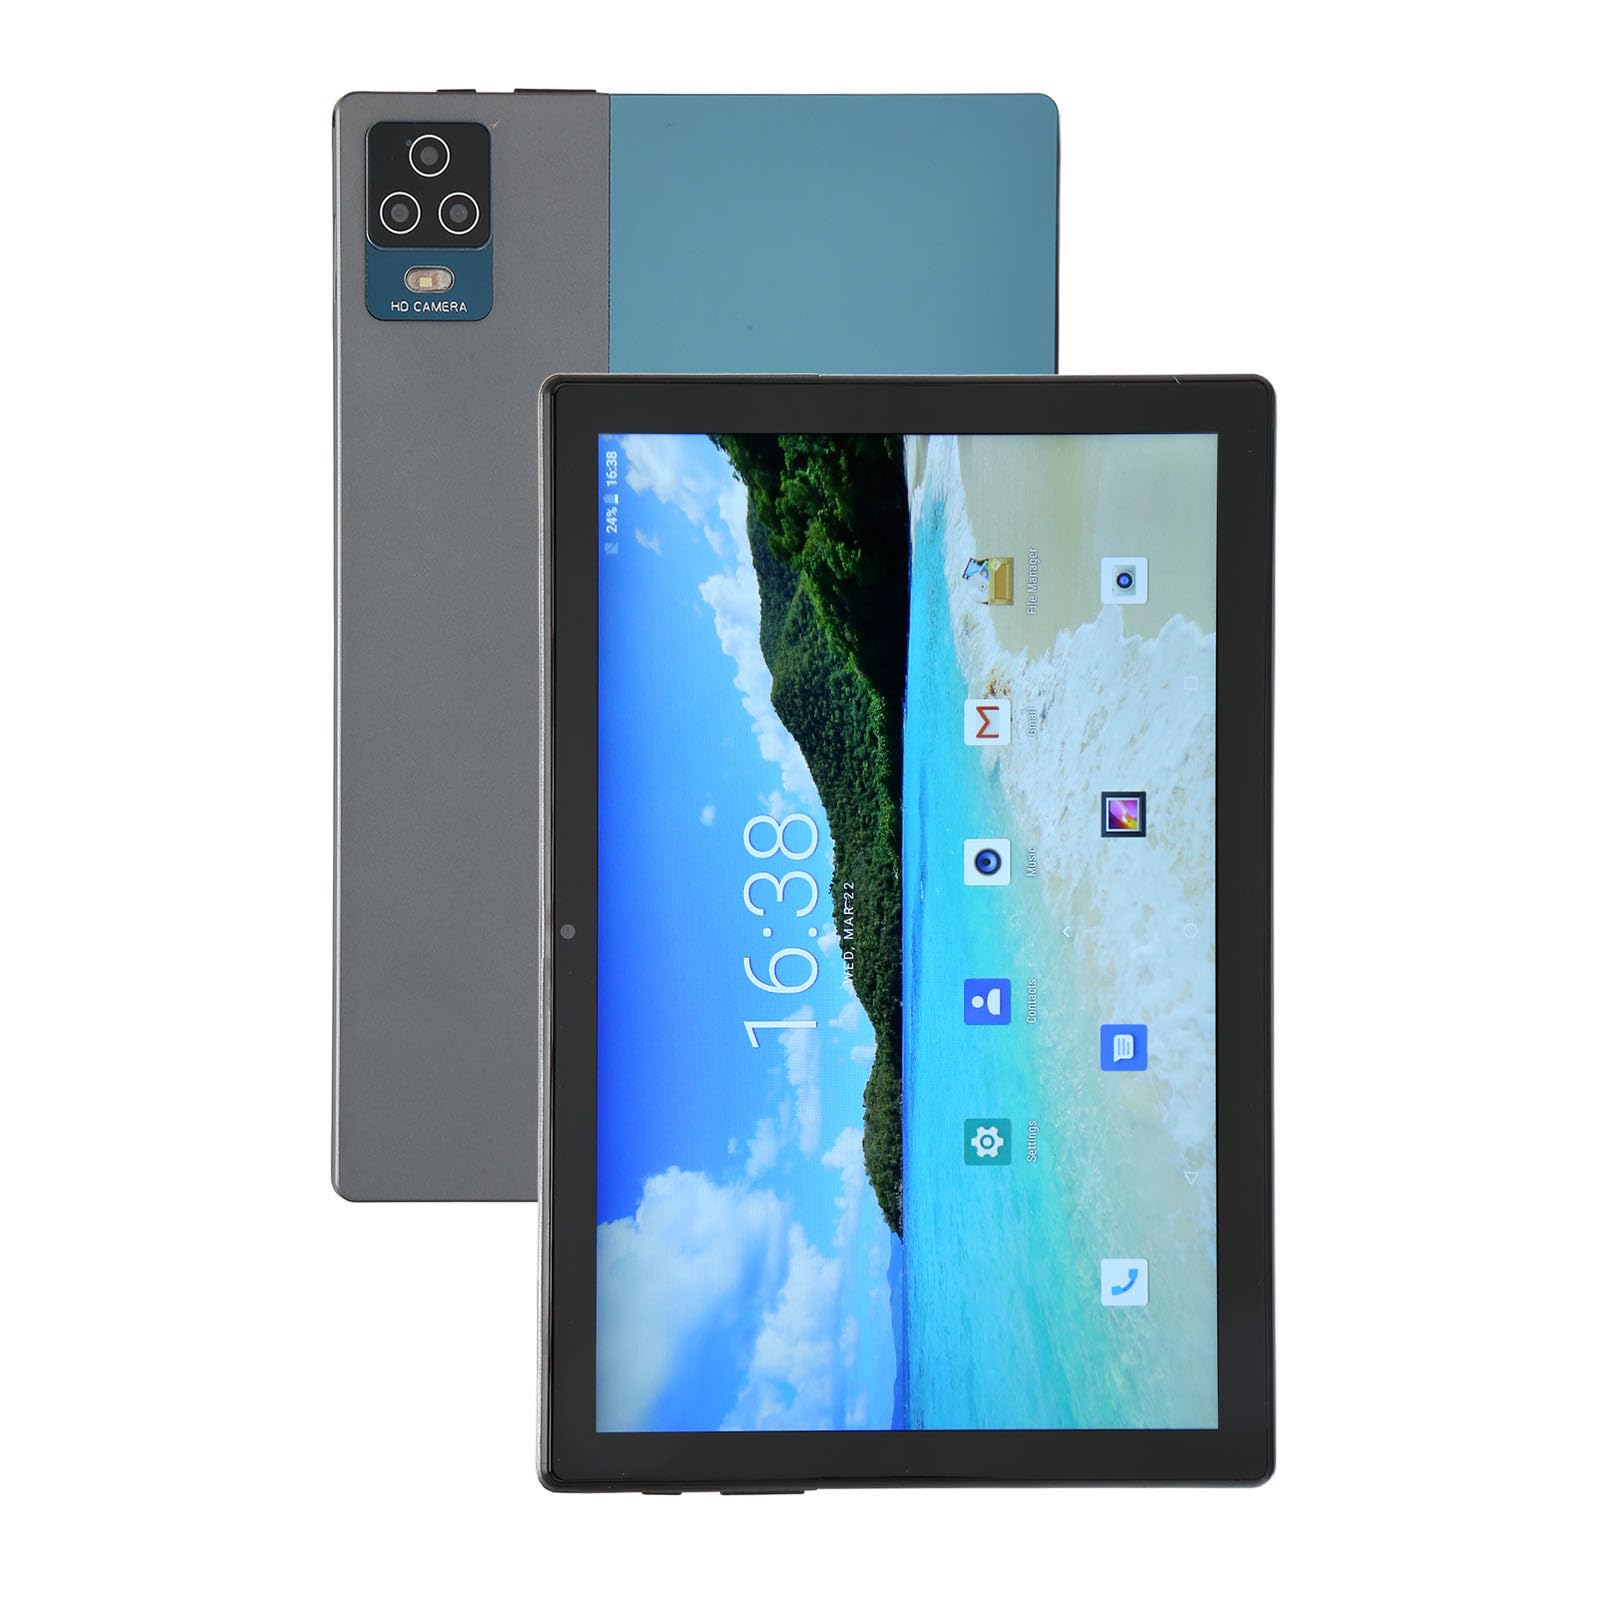 2 in 1 Tablet 10.1 Inch 12 8GB 256GB 16MP Camera Octa Core Processor WiFi GPS BT Tablet PC with Keyboard Blue (US Plug)